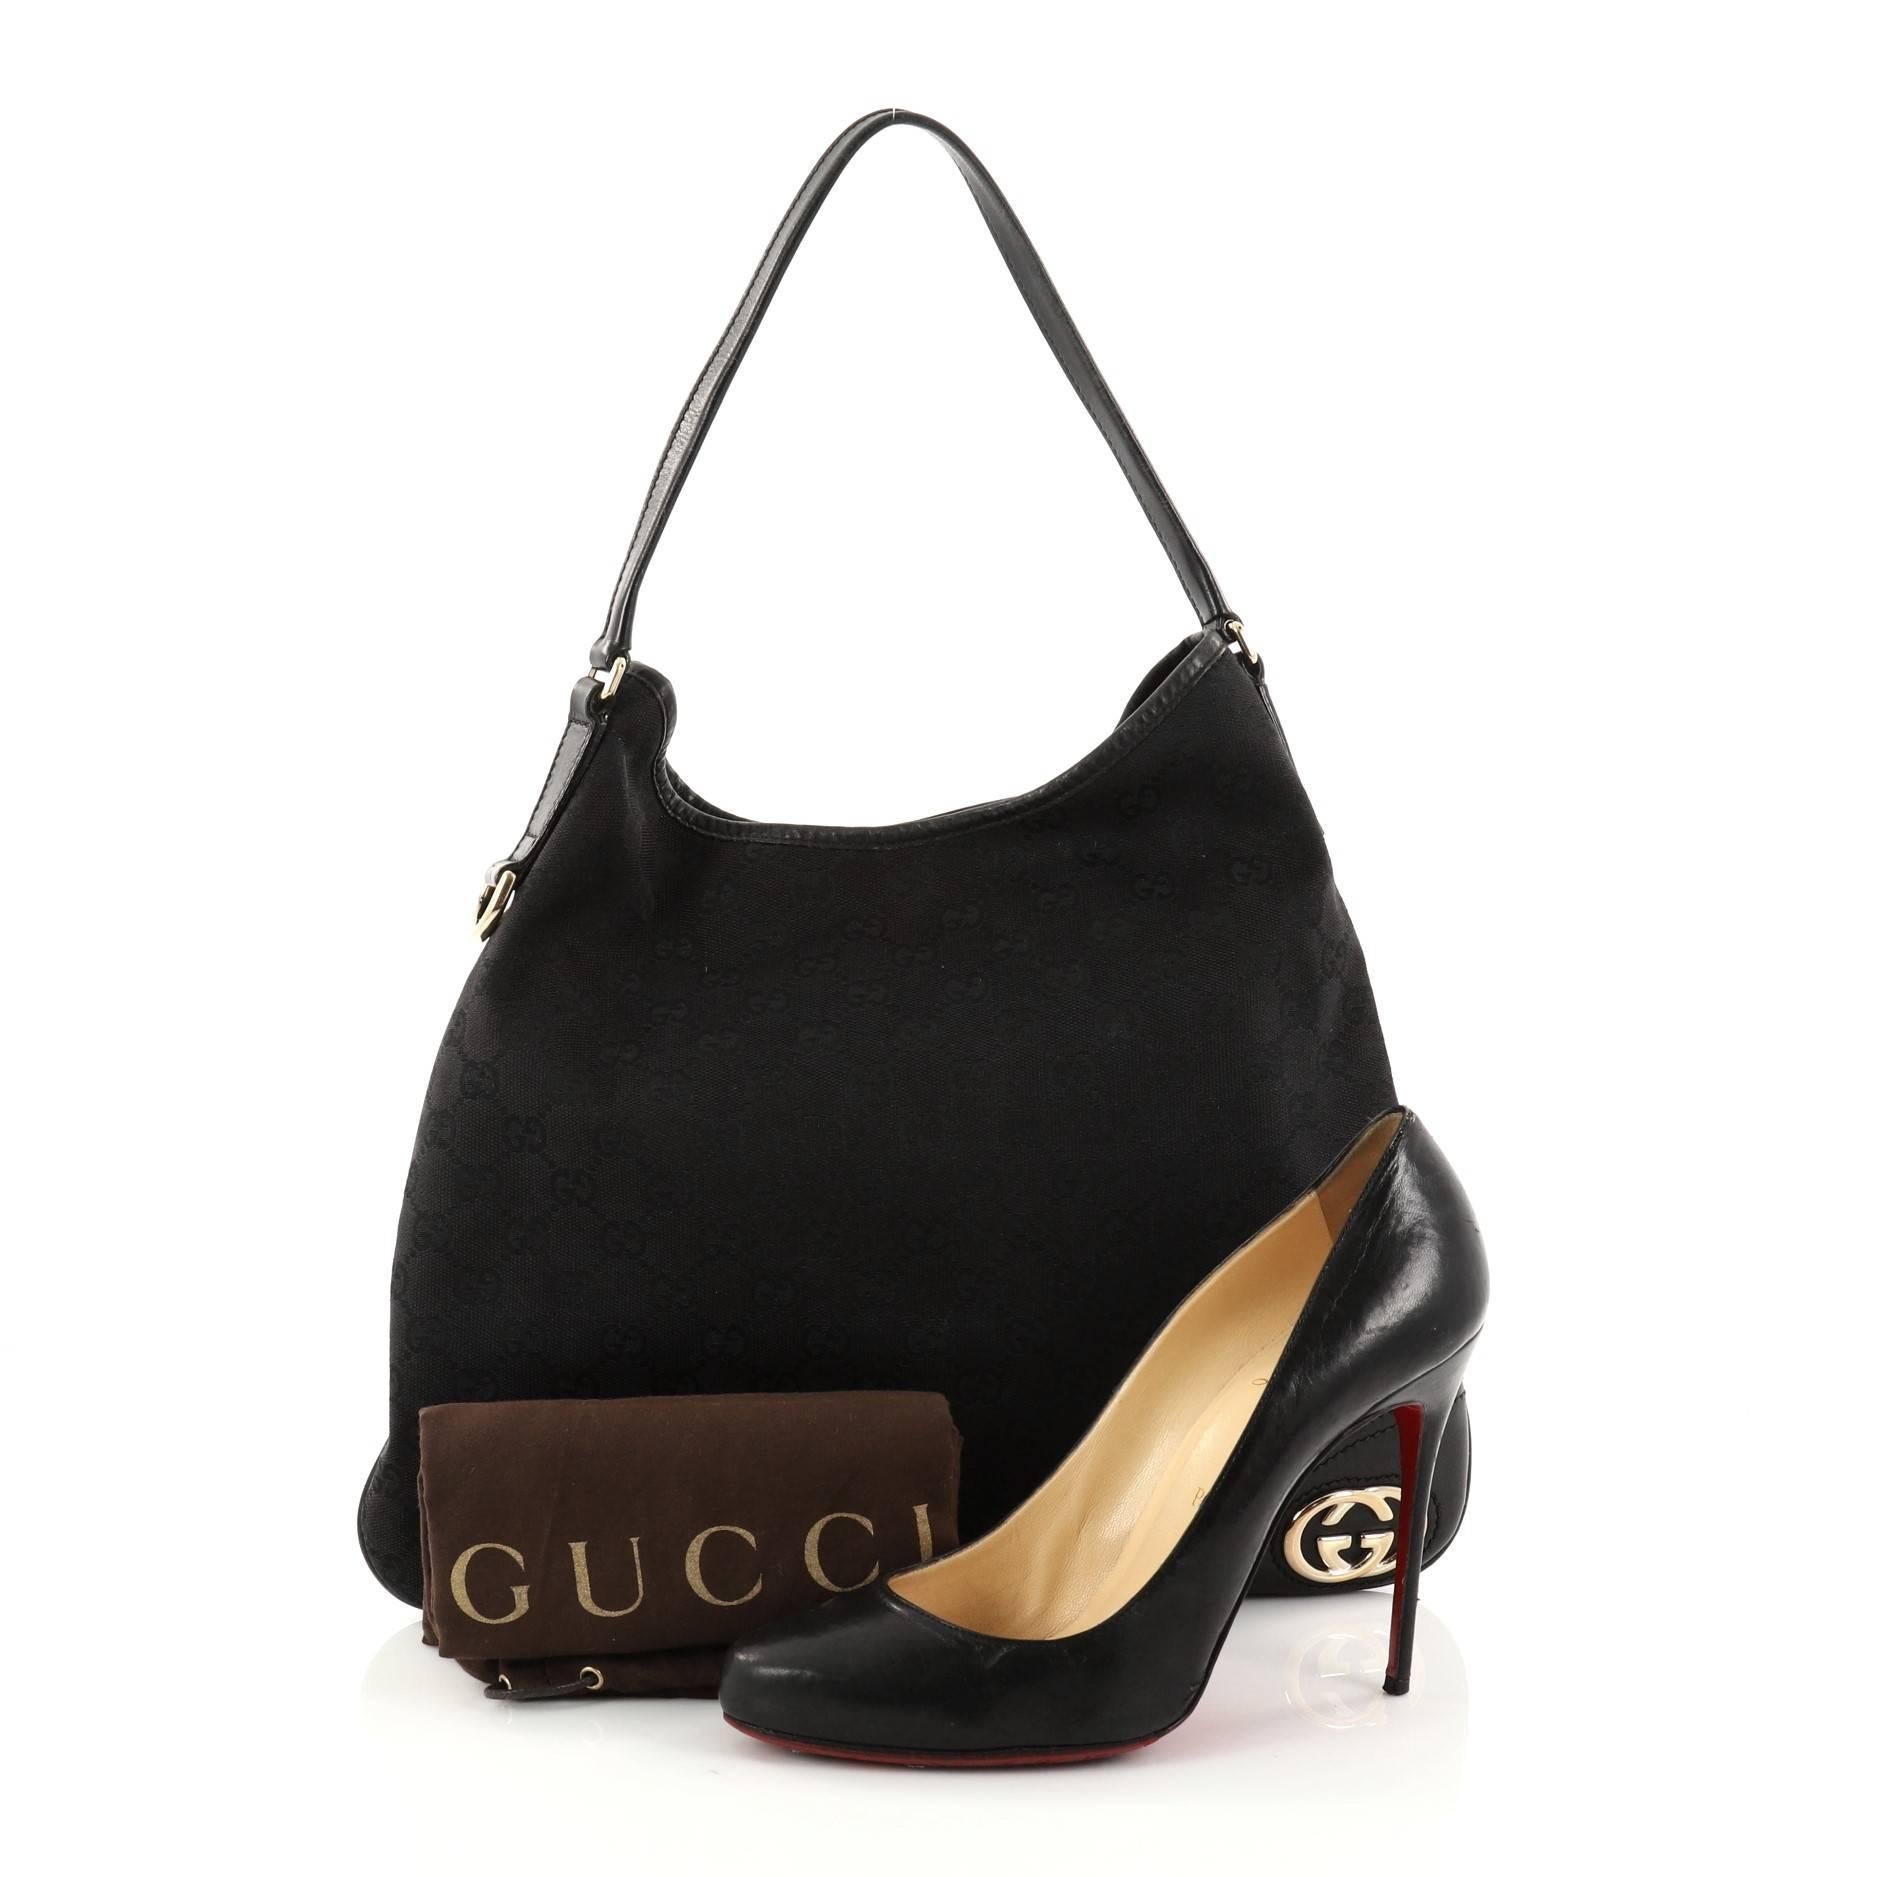 This authentic Gucci New Britt Hobo GG Canvas Medium is perfect for any casual or sophisticated outfit. Constructed from black GG canvas, this lightweight shoulder bag features a looping leather strap, black leather trims with GG interlocking logo